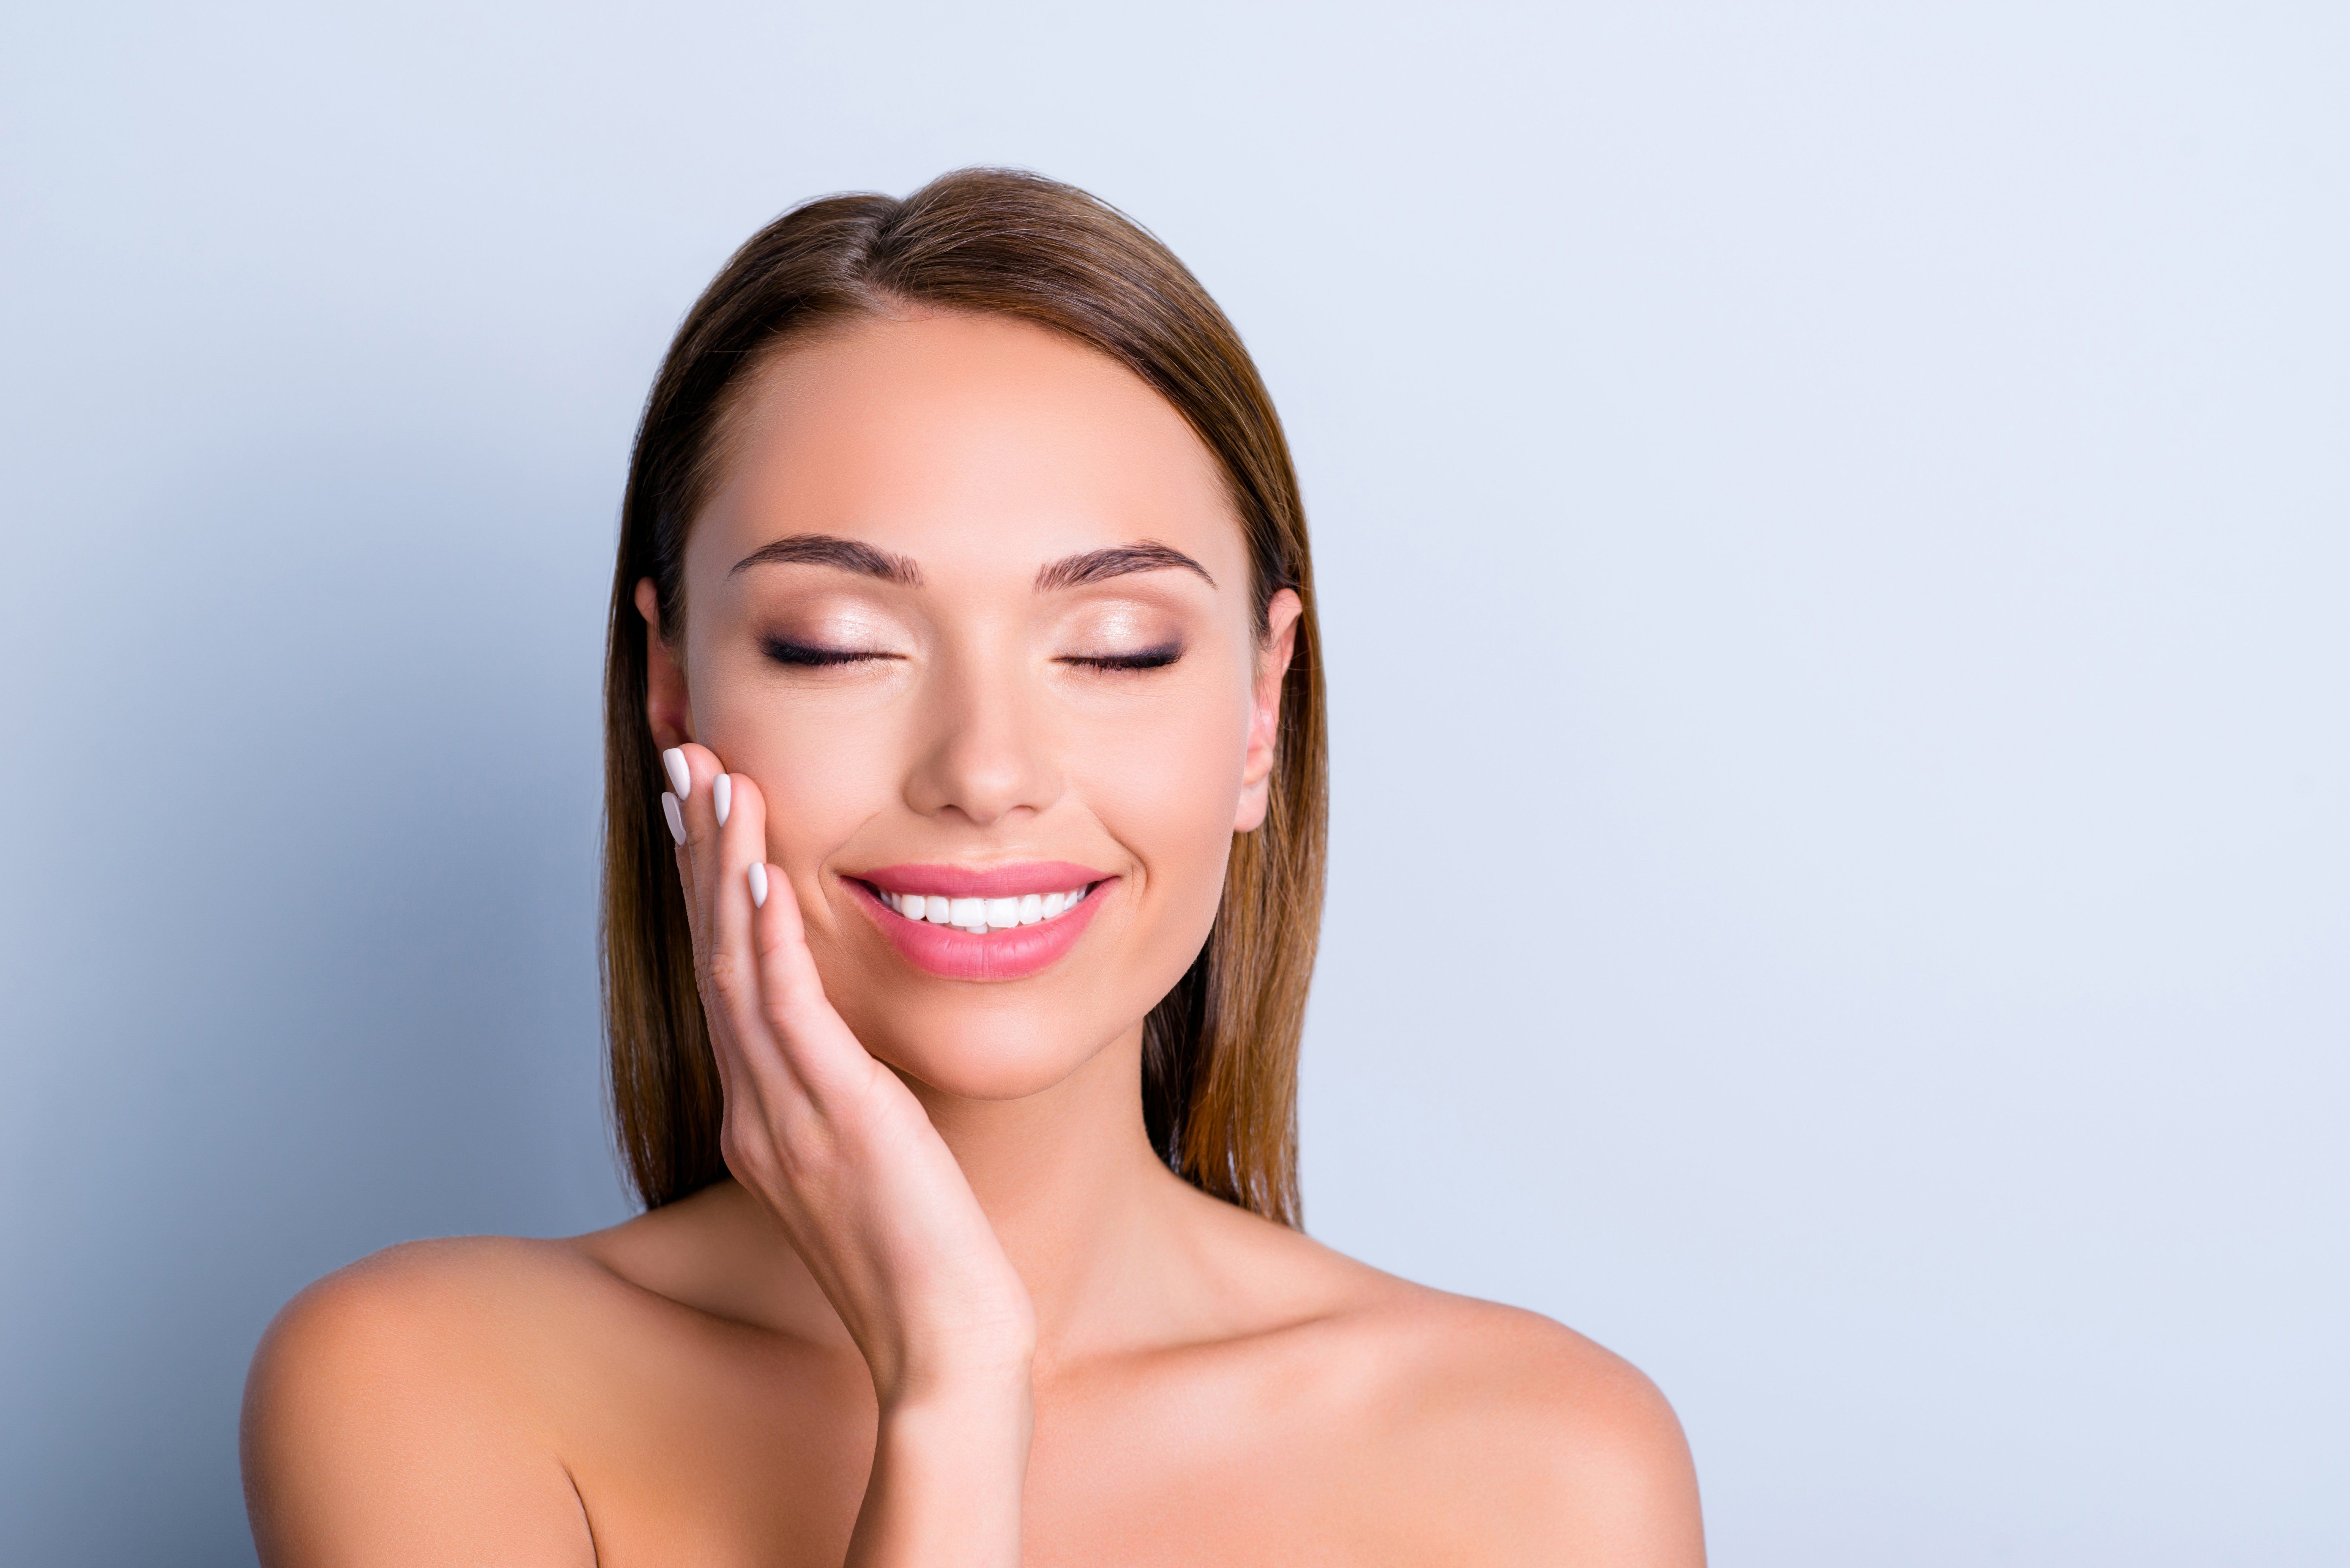 What Benefits Does Botox Have for Dental Work?